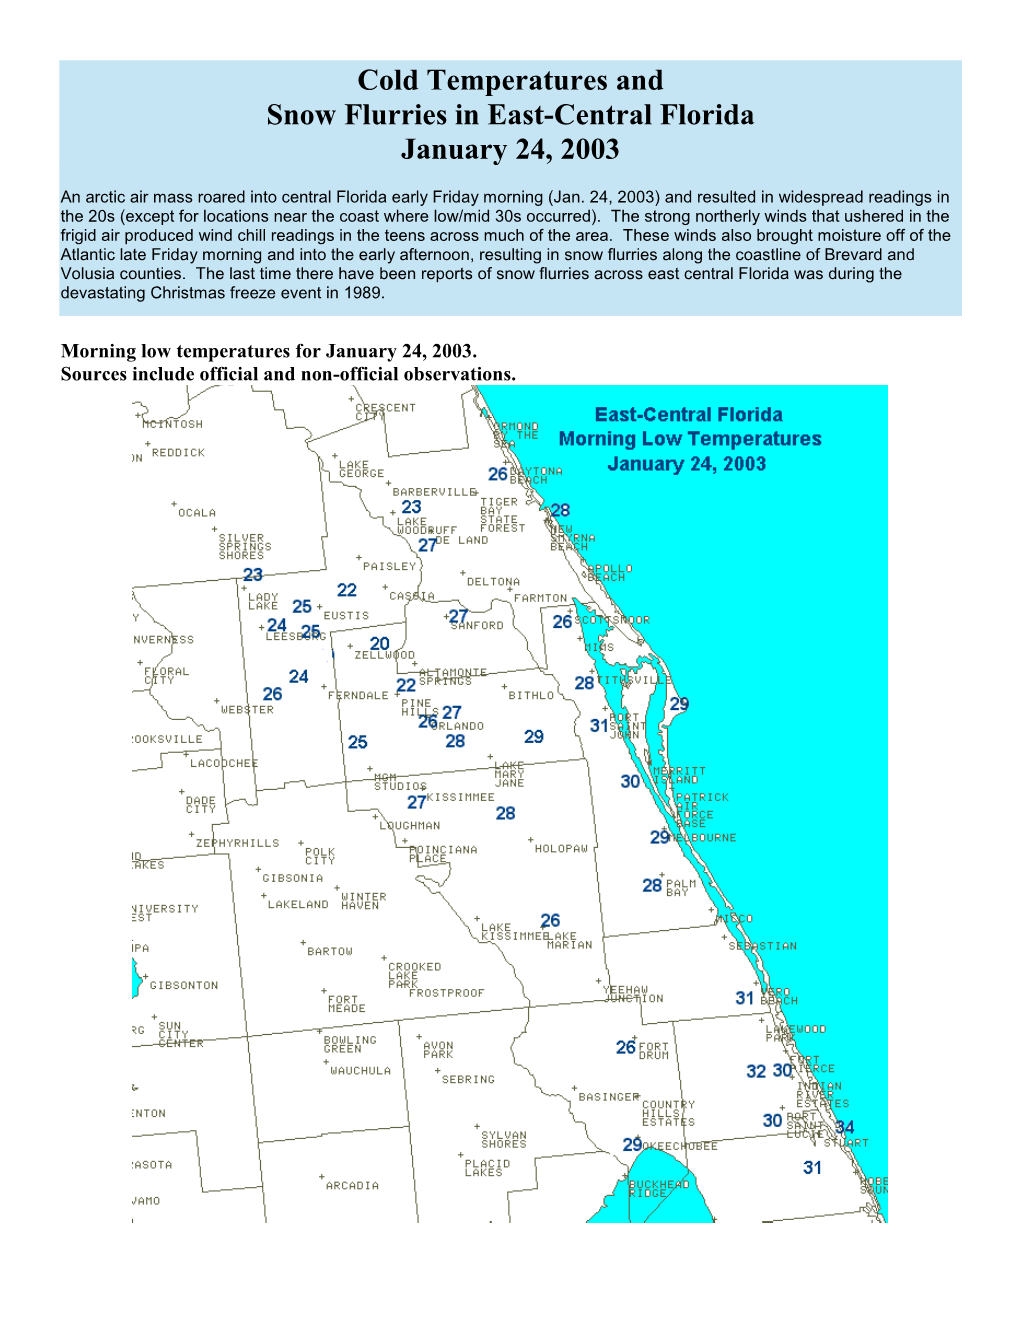 Cold Temperatures and Snow Flurries in East-Central Florida January 24, 2003